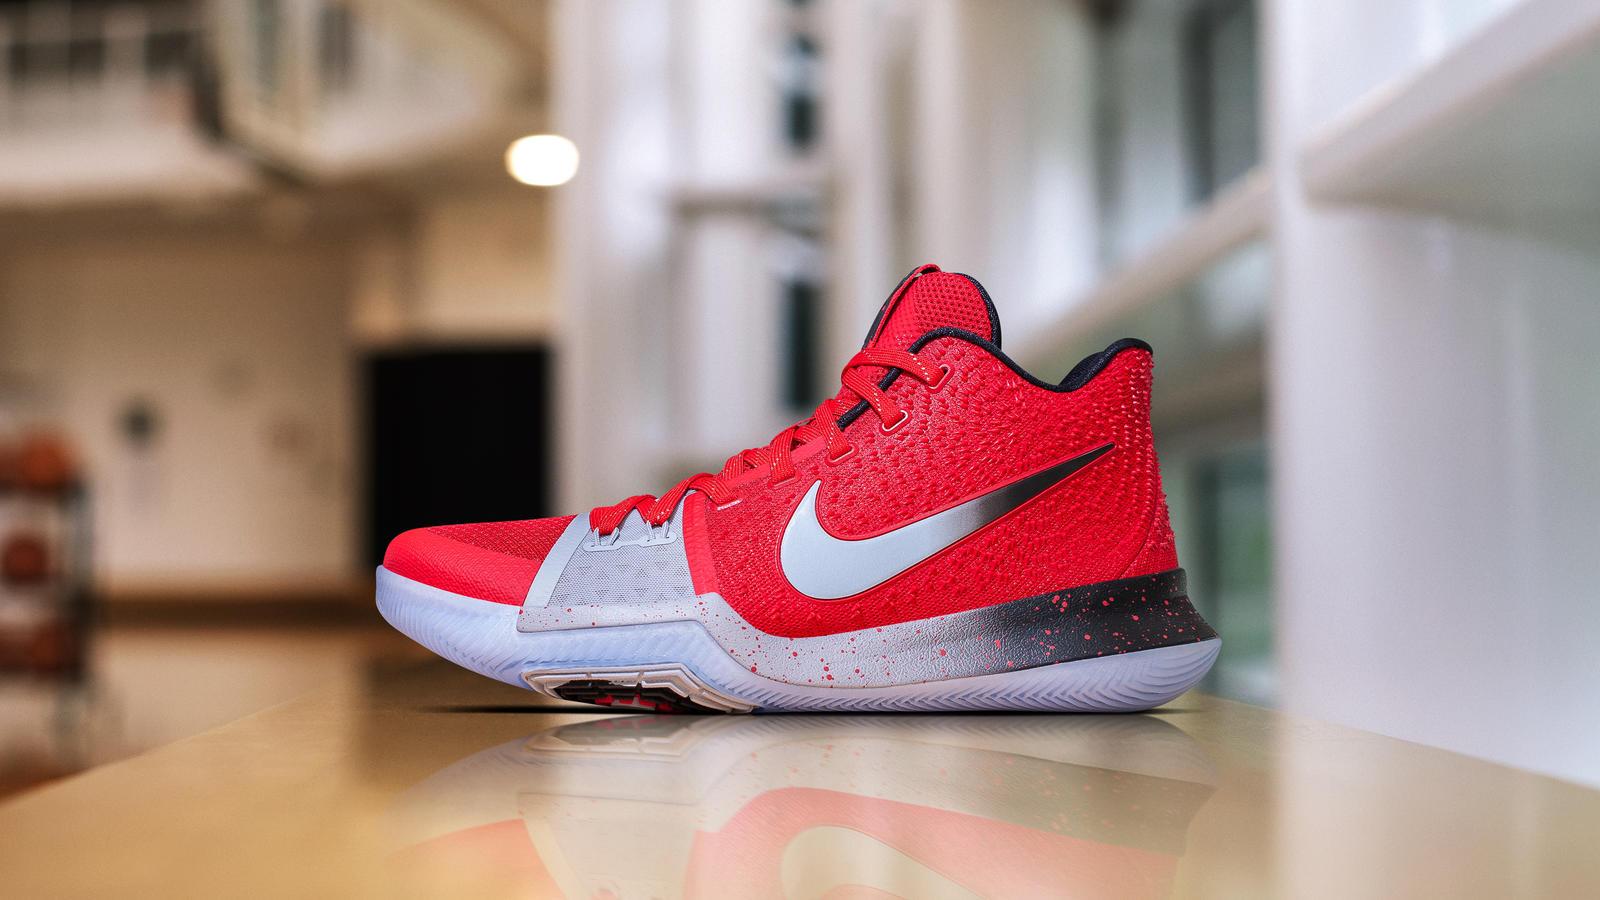 New Nike Kyrie 3 PE Means You Can't Get It